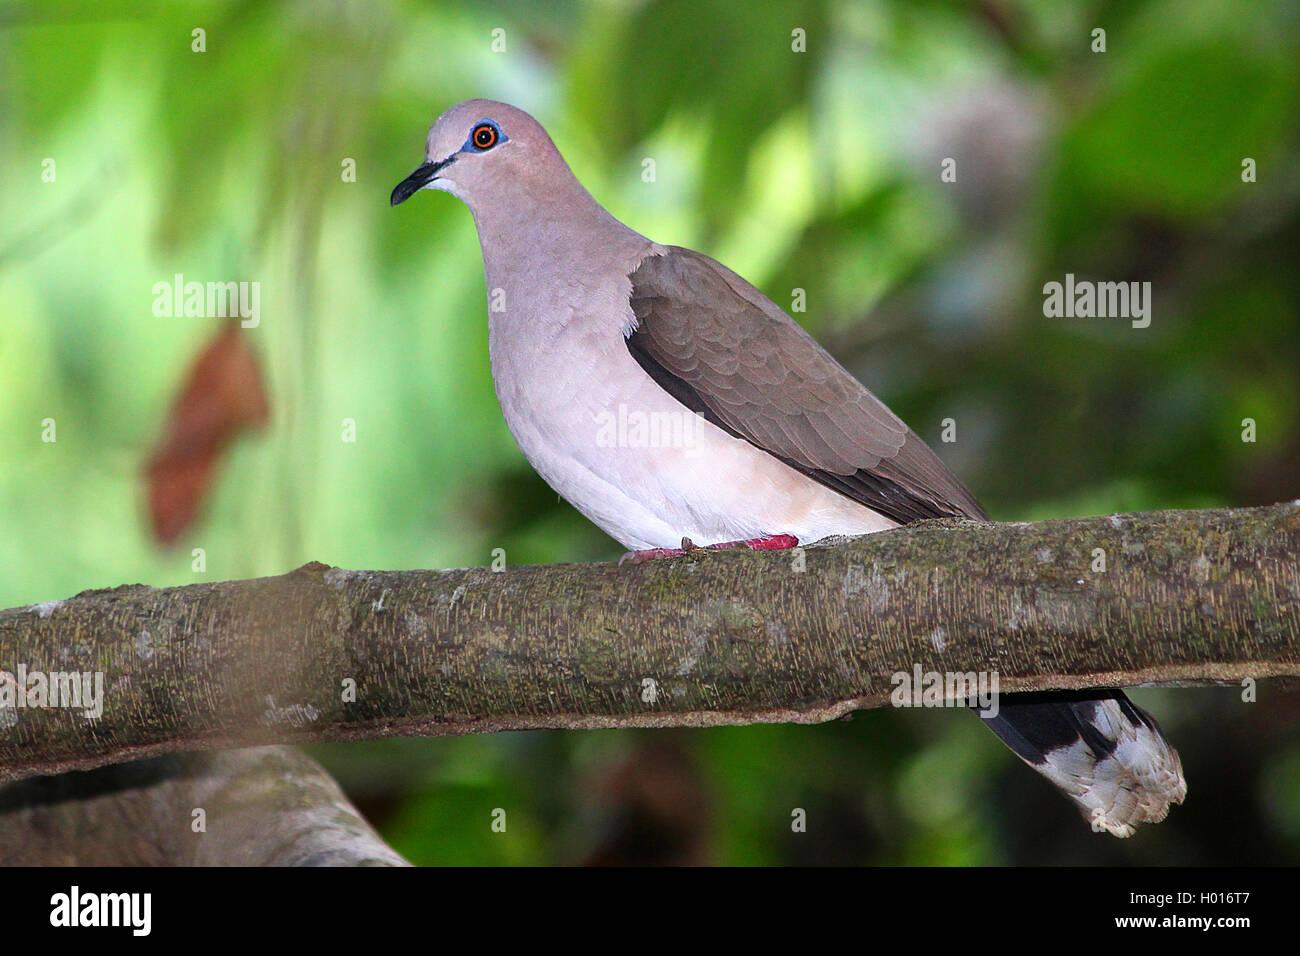 White-fronted dove (Leptotila verreauxi), sits on a branch, Costa Rica Stock Photo